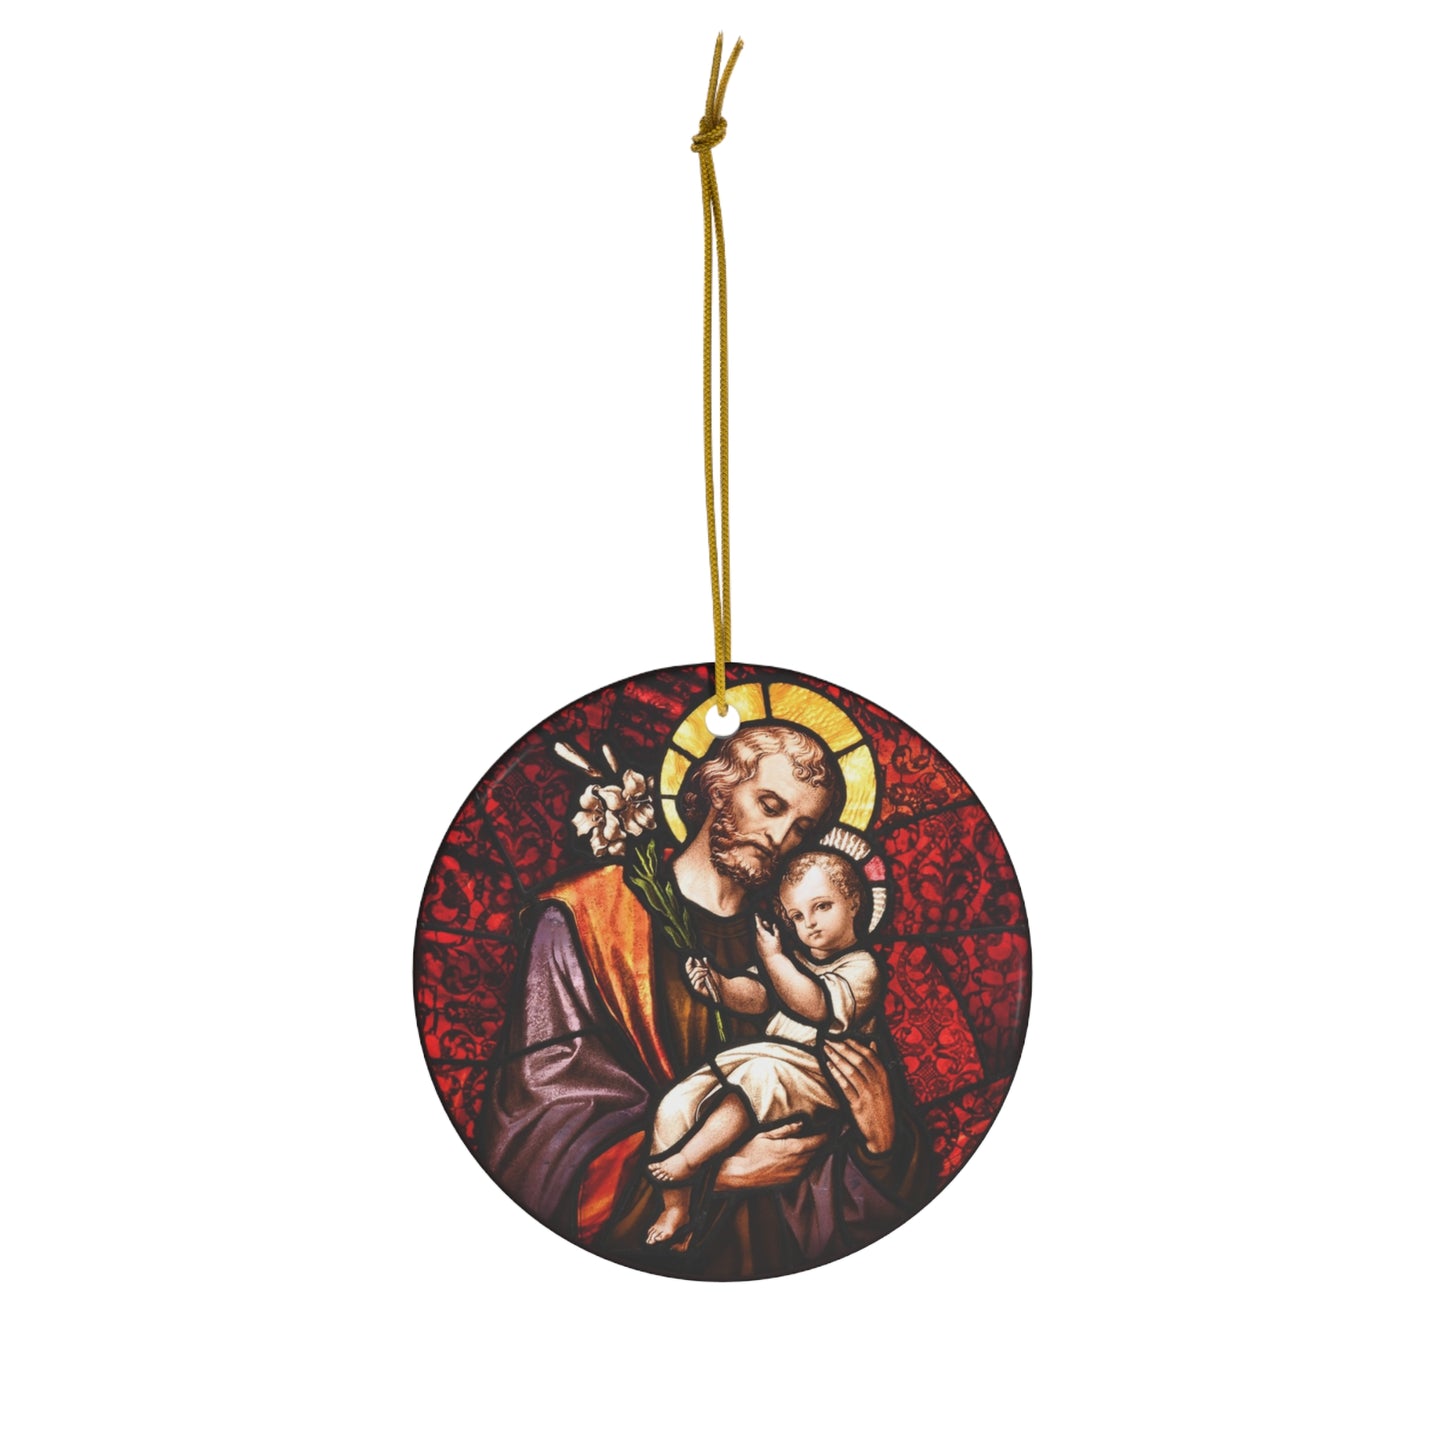 Catholic Christmas Ornament: St Joseph and Child Jesus, Ceramic Christmas Ornament, Catholic Icon, Religious Giftm, Stained Glass